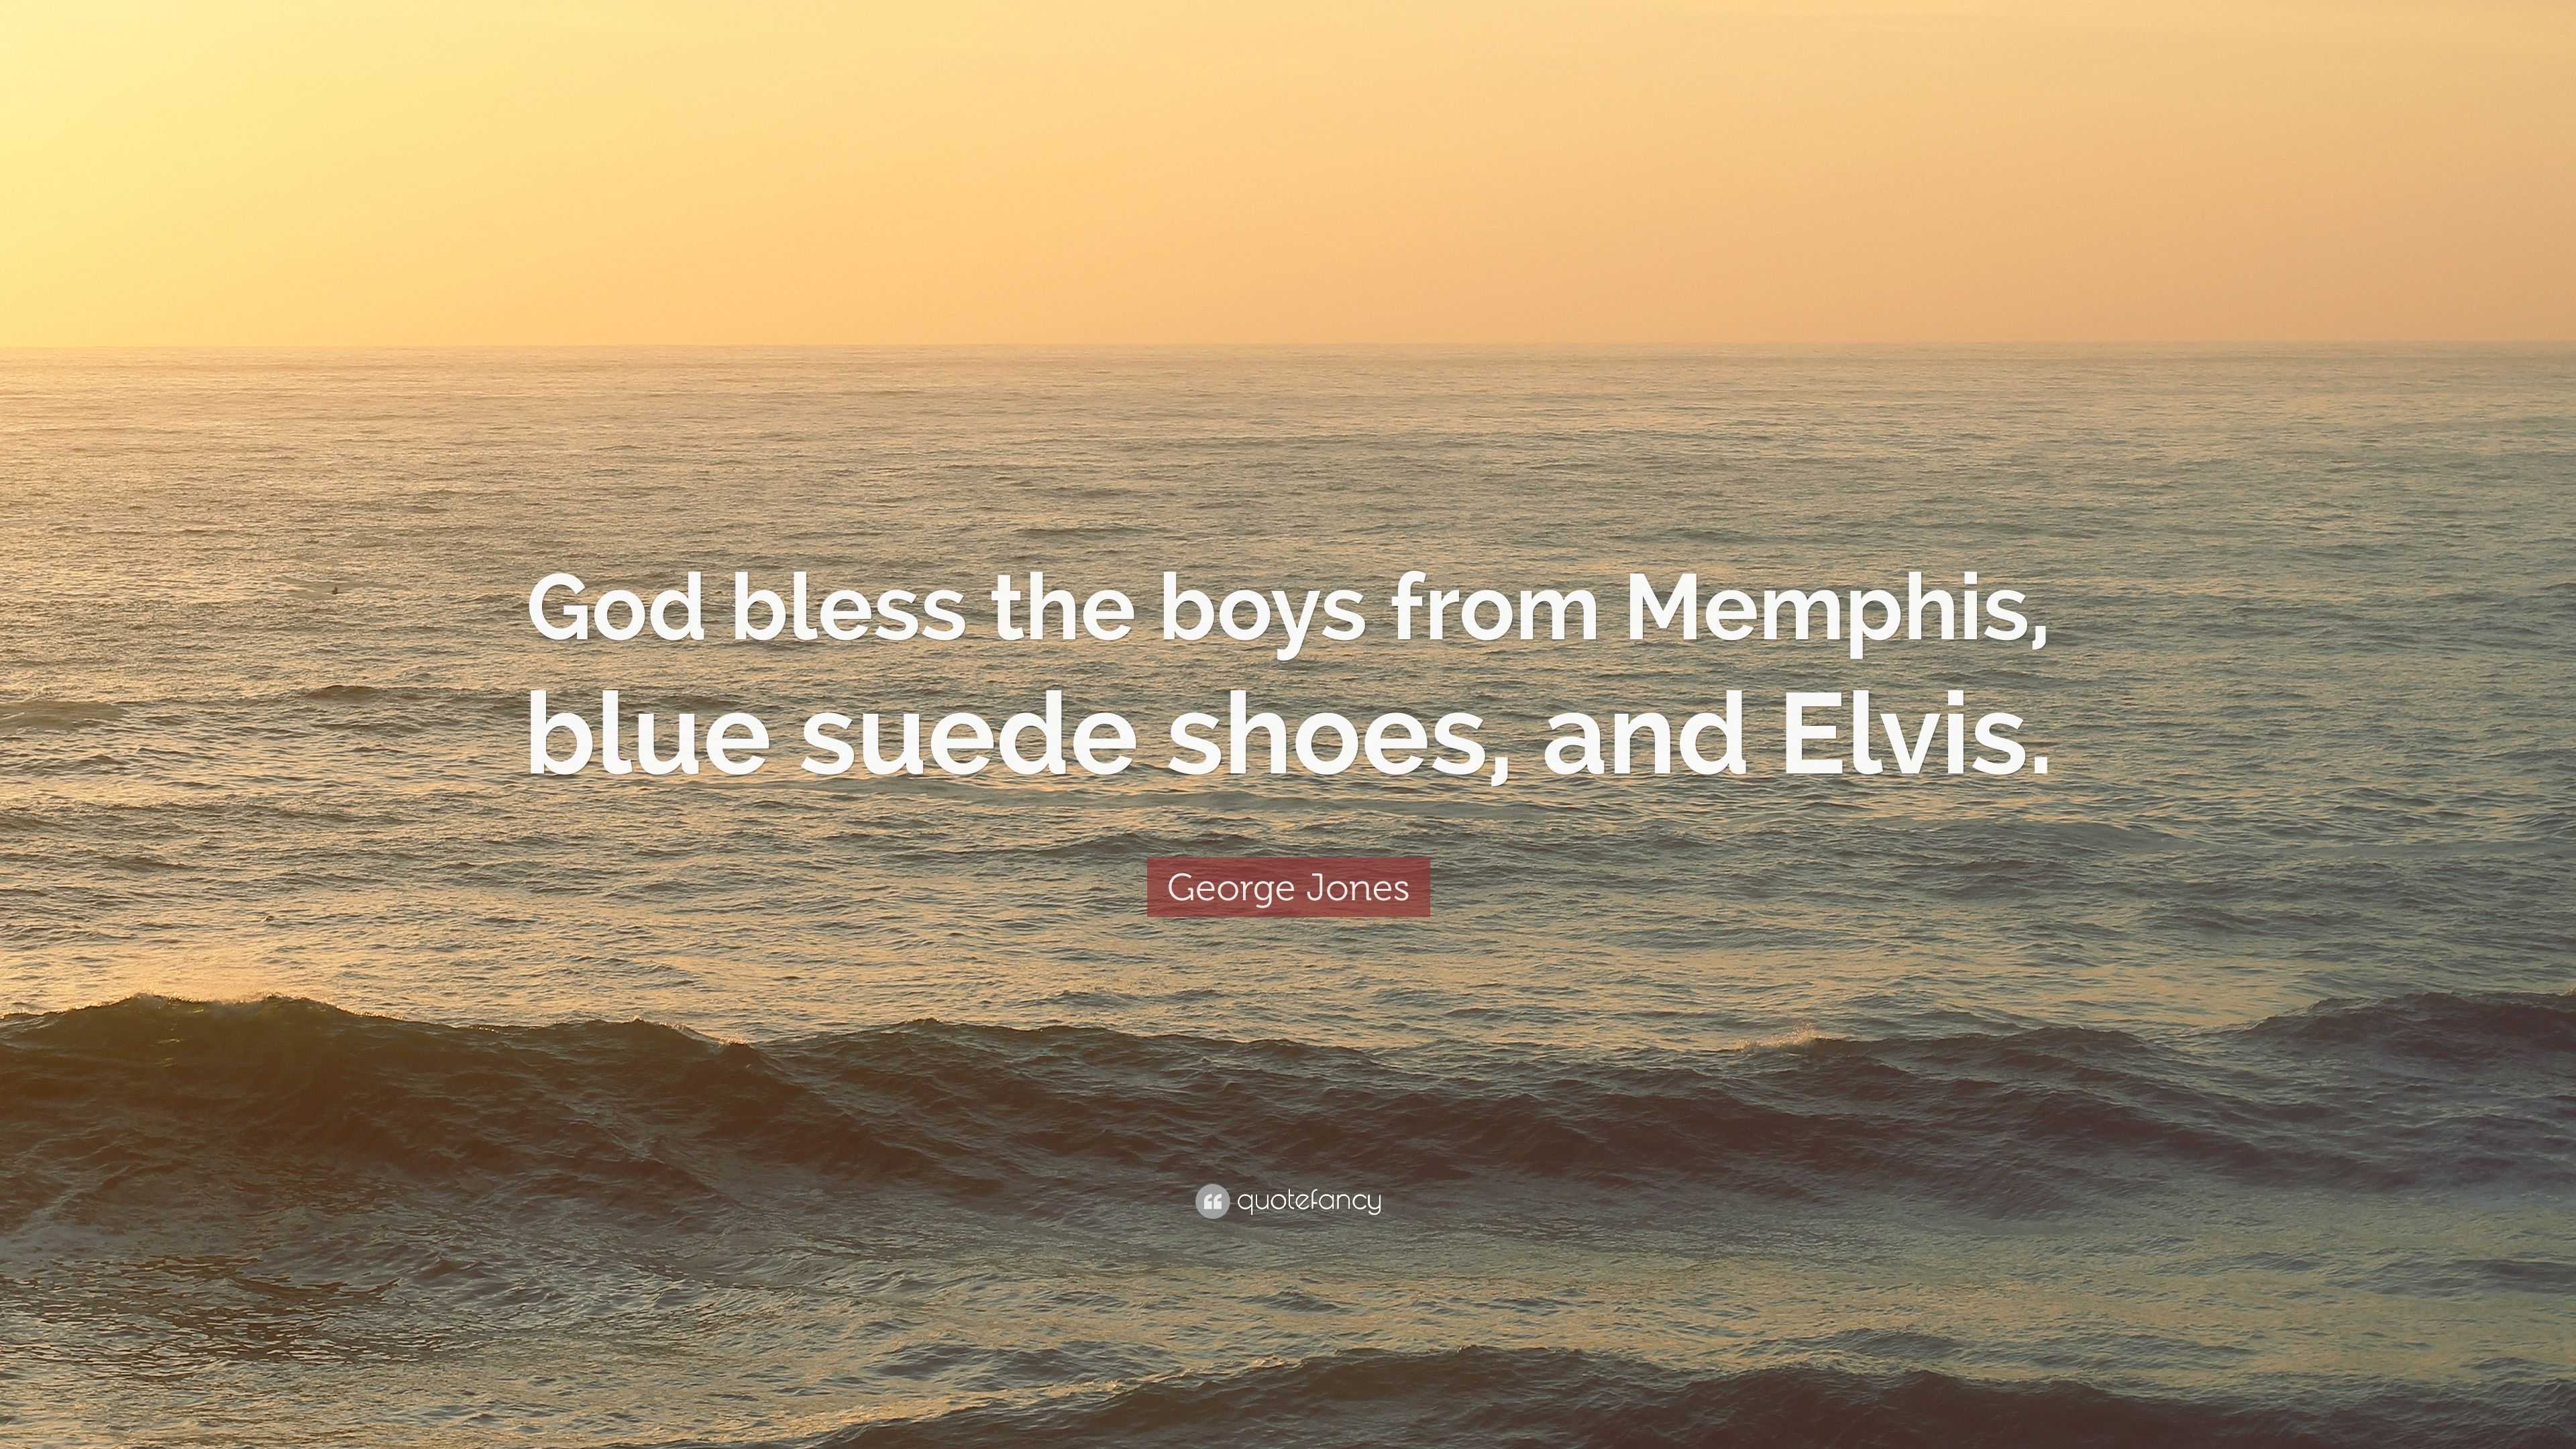 Get out your blue suede shoes and - Inn of the Mountain Gods